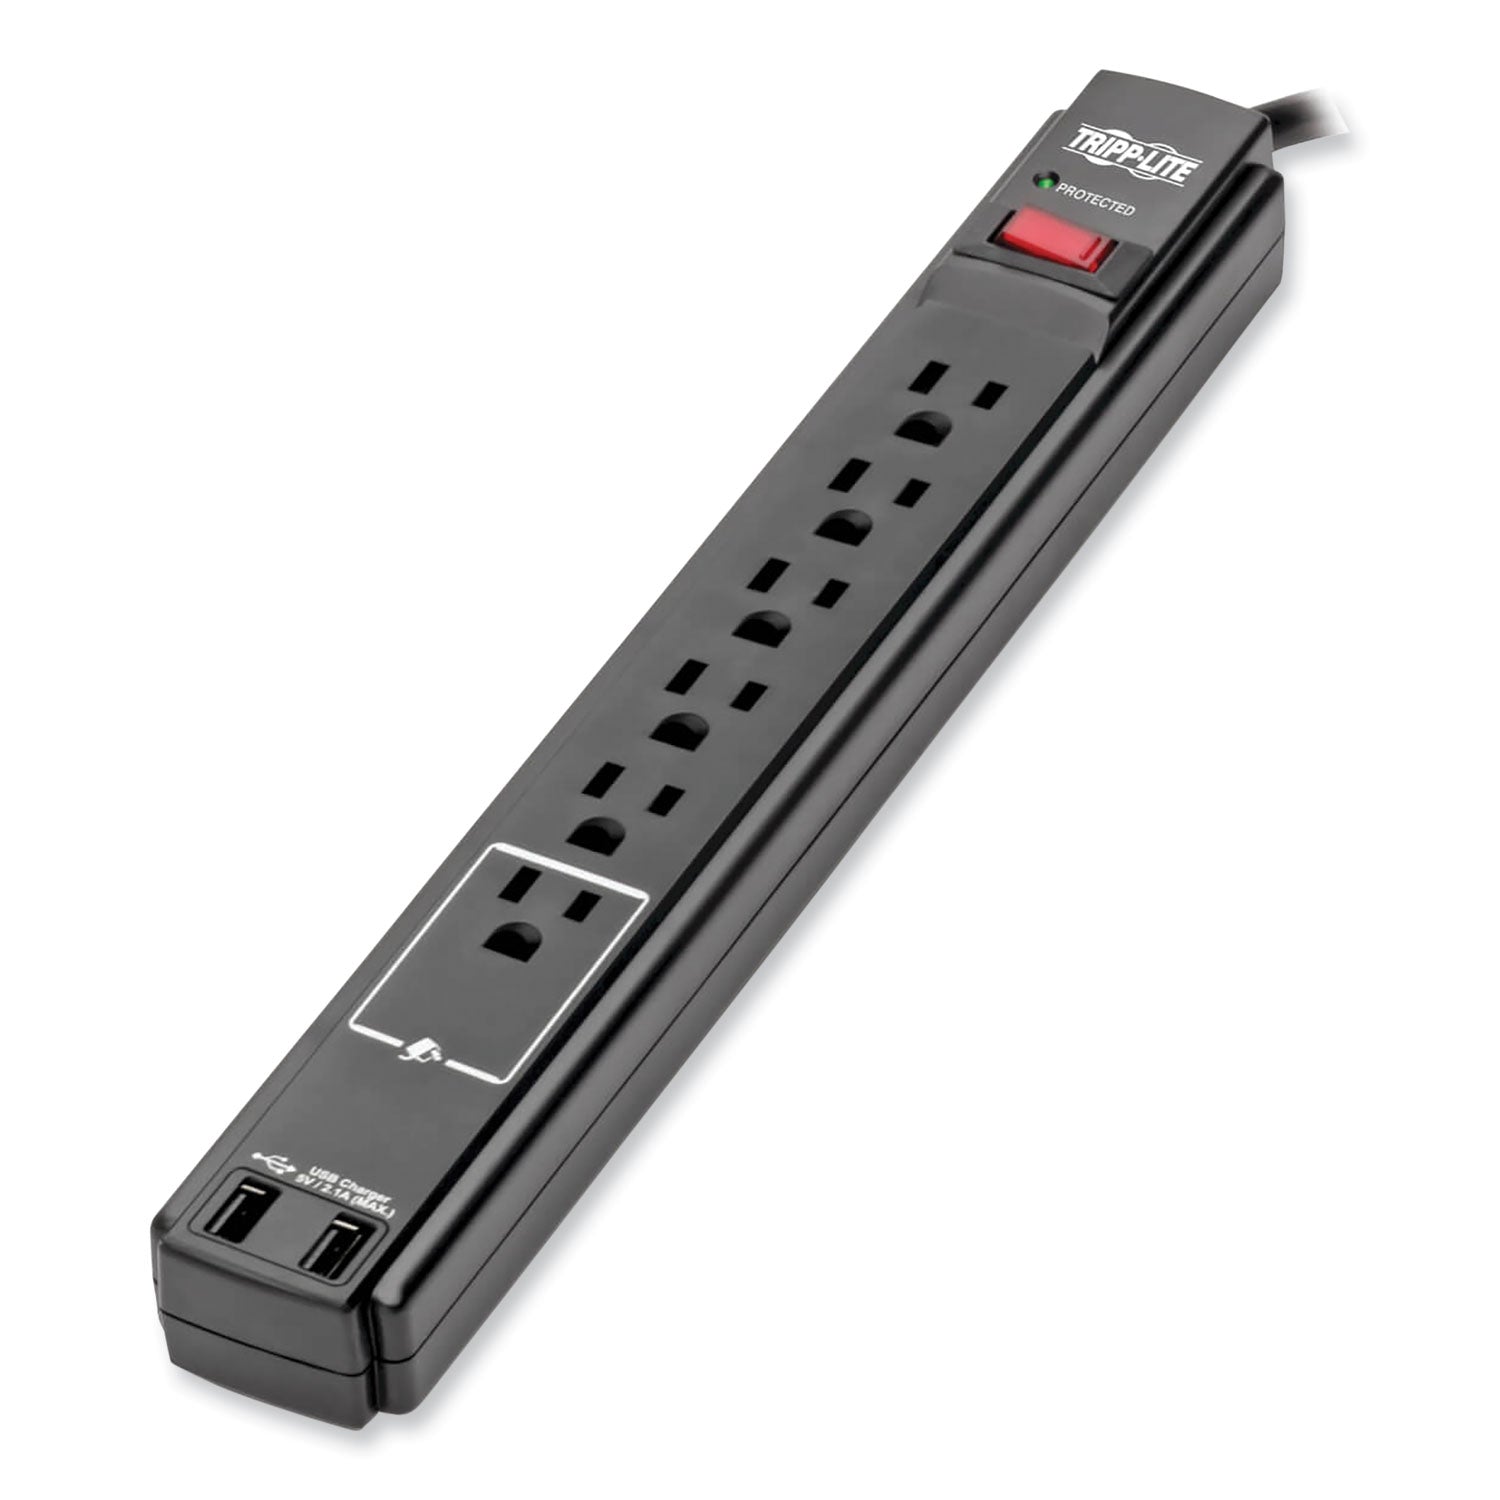 protect-it!-surge-protector-6-ac-outlets-2-usb-ports-6-ft-cord-990-j-black_trptlp606usbb - 1